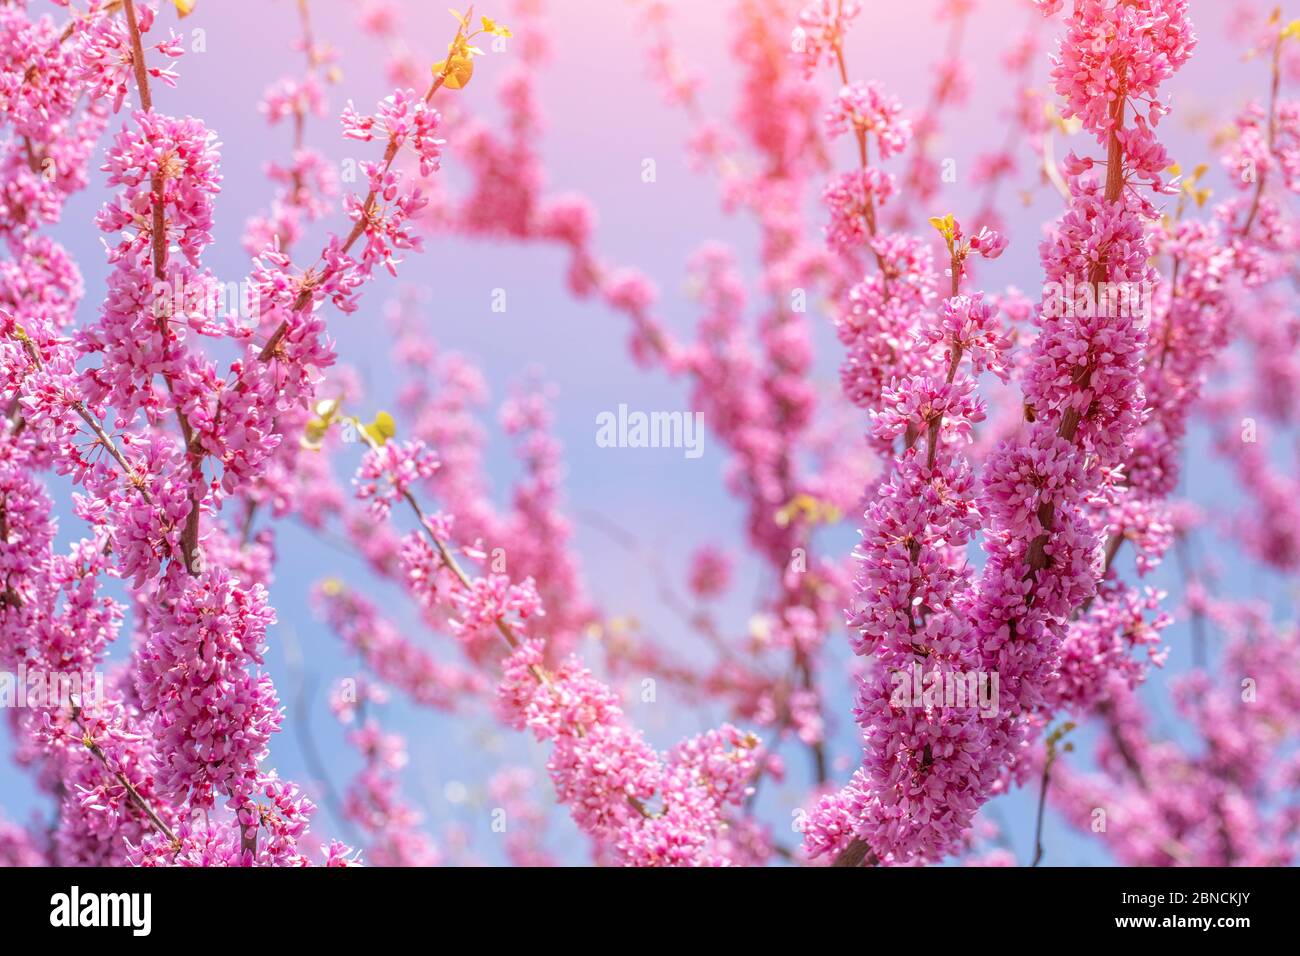 Cercis canadensis Canadian crimson, pink flowers on a background of blue sky. Stock Photo